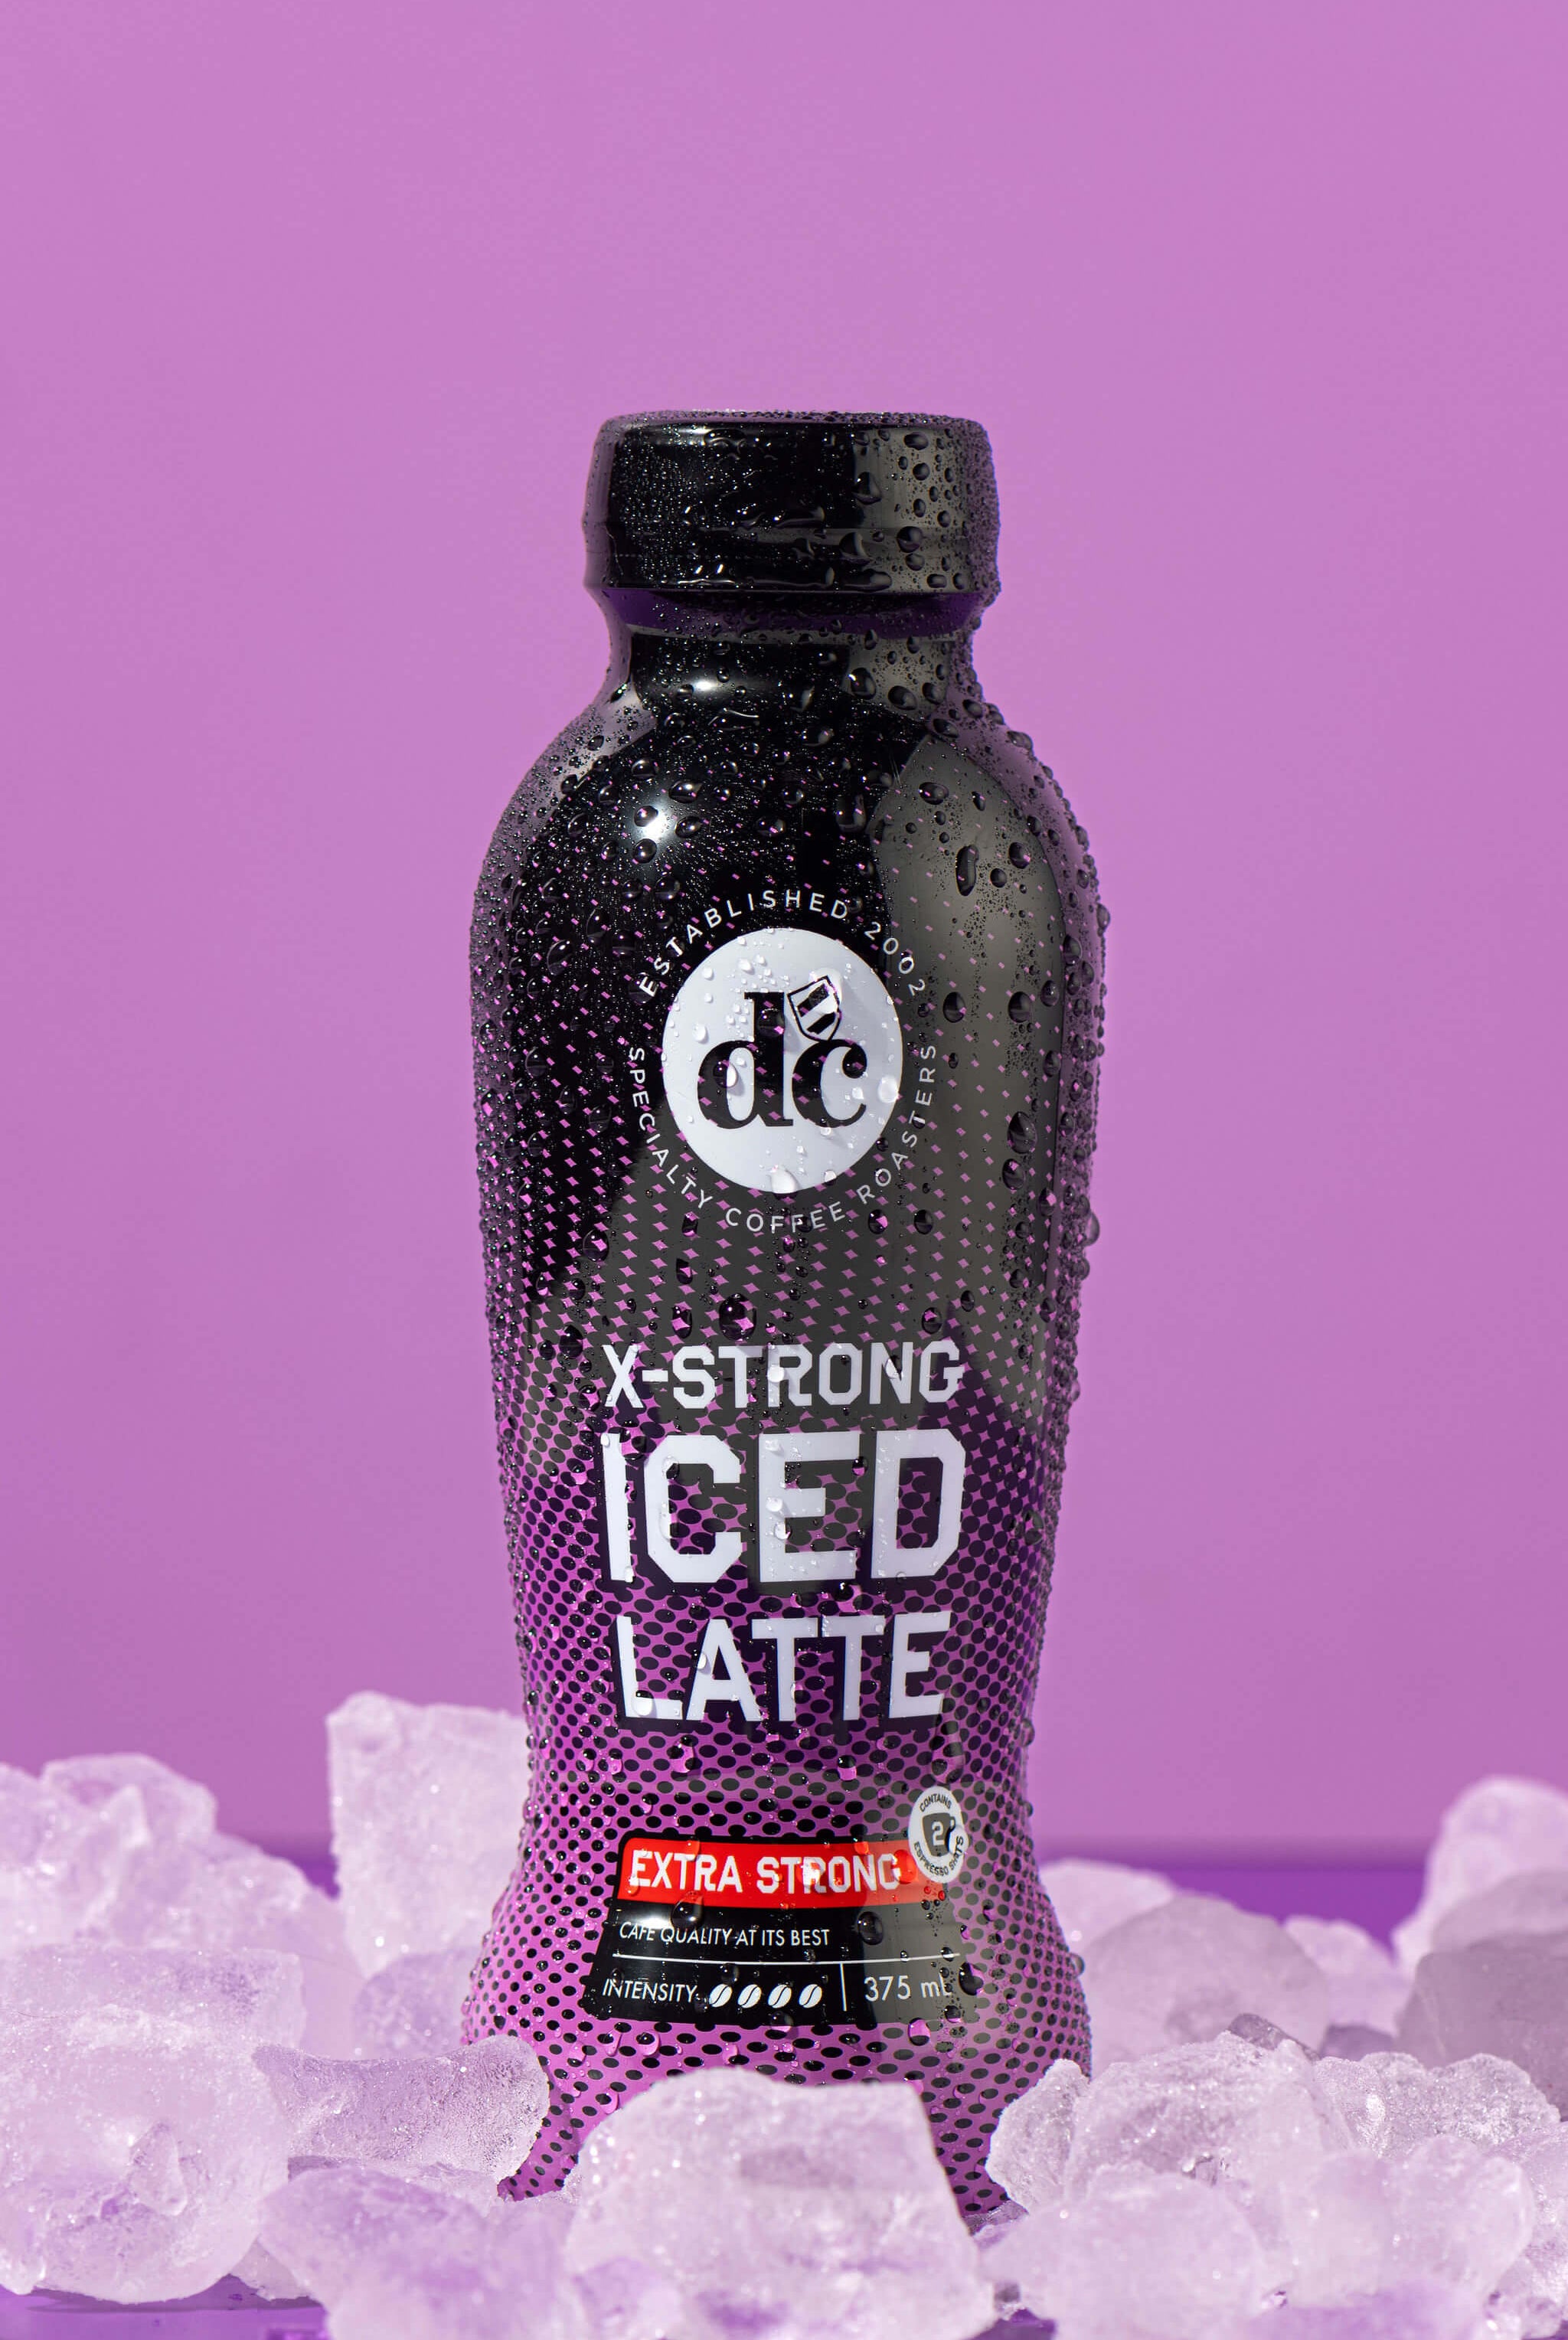 Extra Strong Iced Latte Bottle